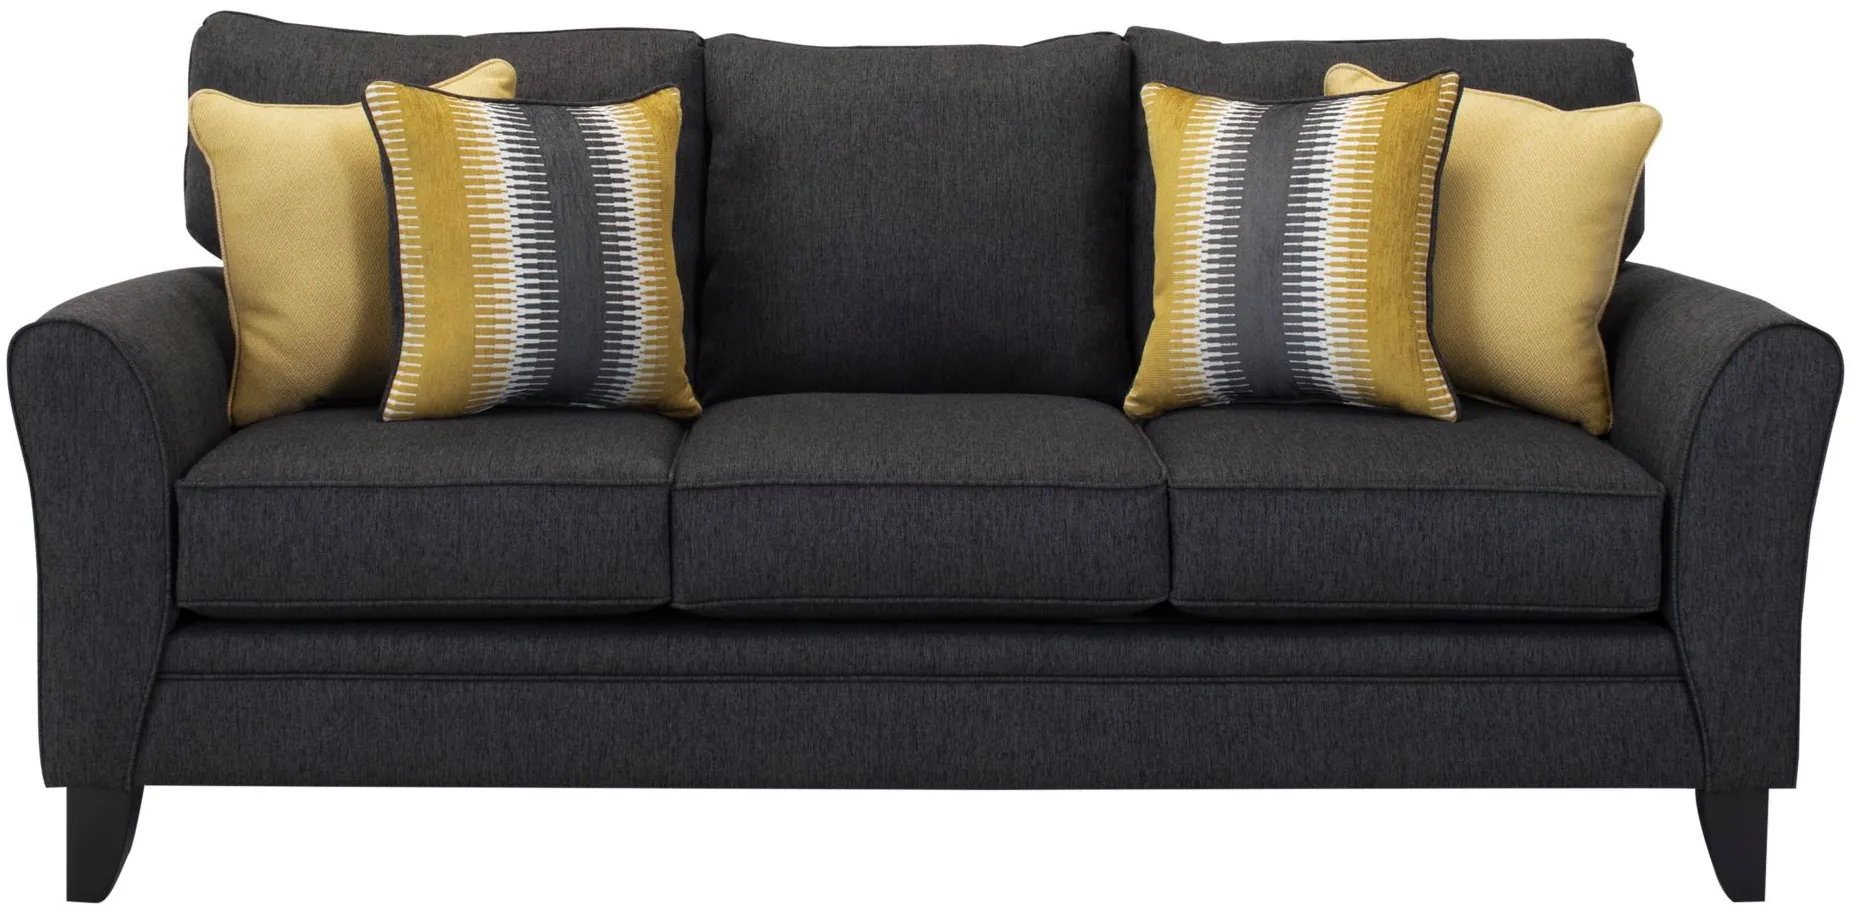 Adelina Sofa in Stoked Carbon by Fusion Furniture